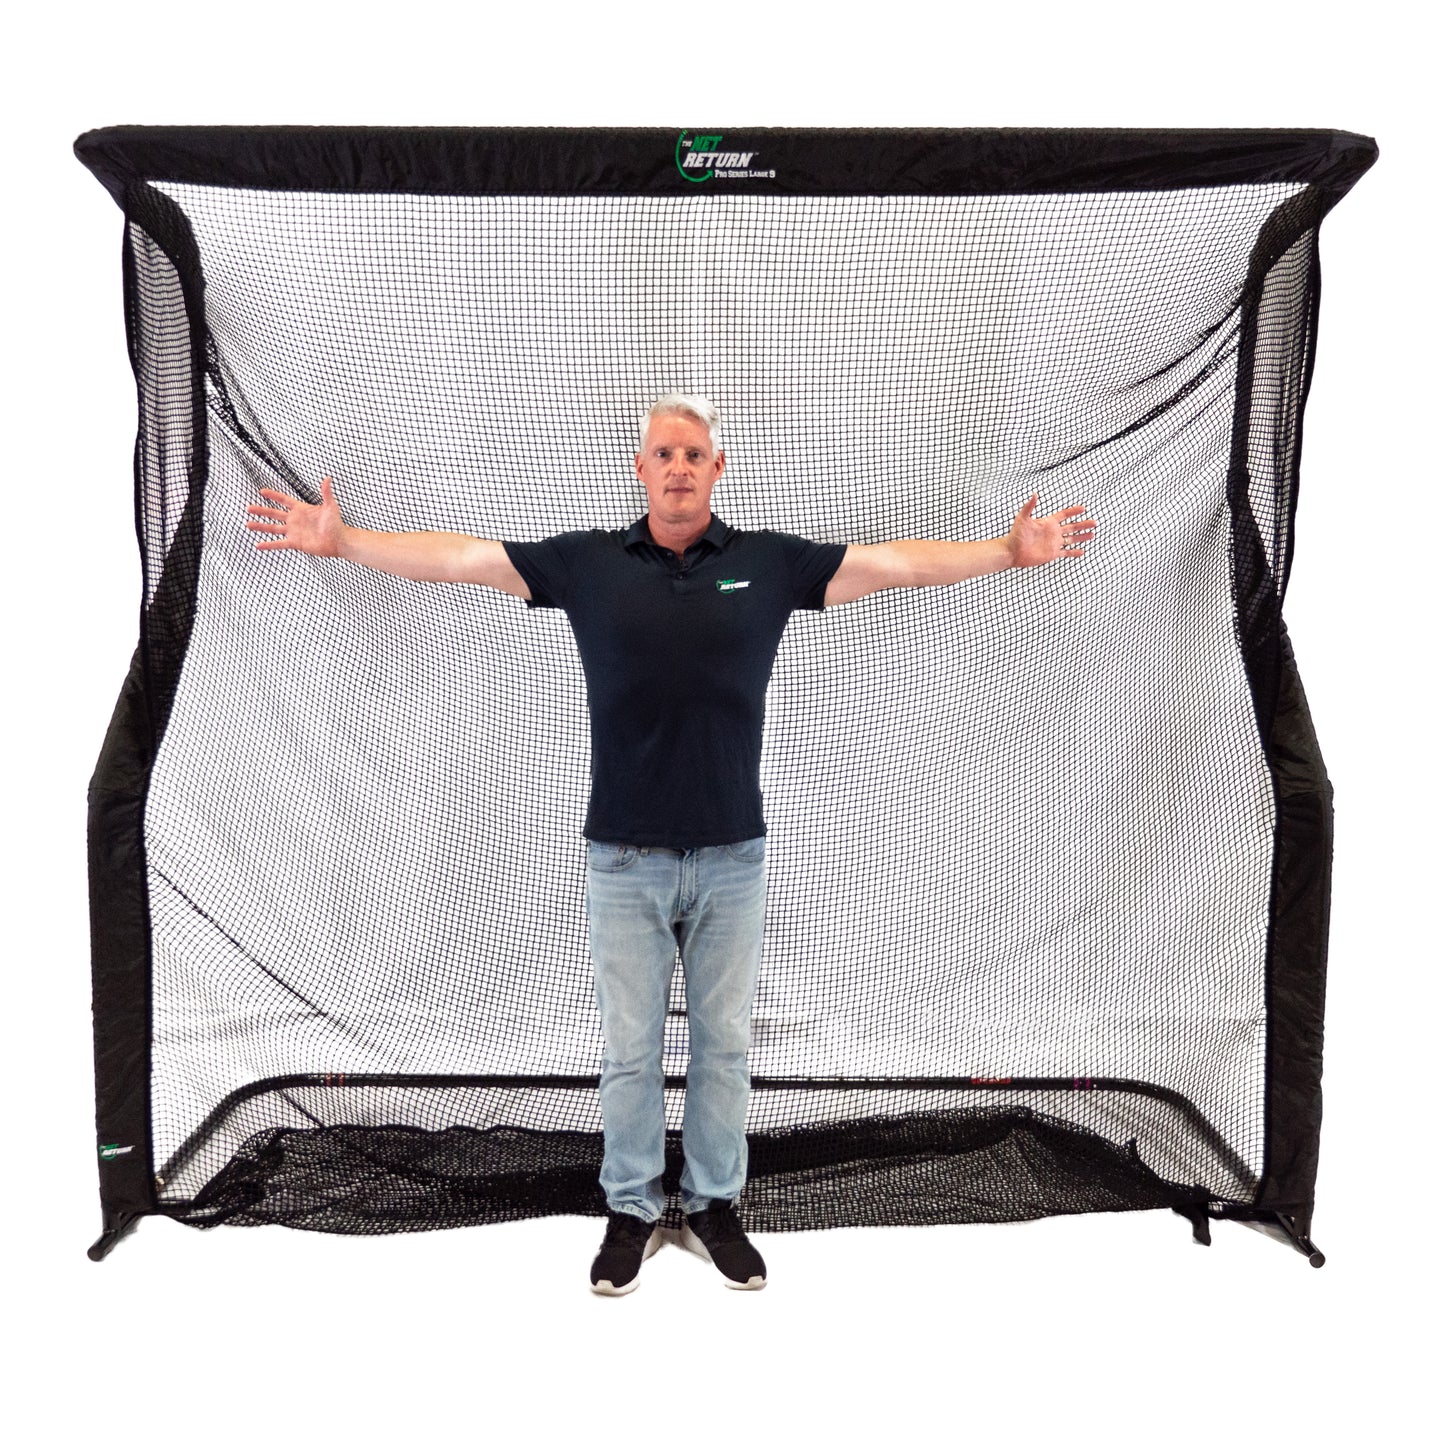 Net Return Pro Series V2 Large Front View With Golfer Stretching Hands In Front